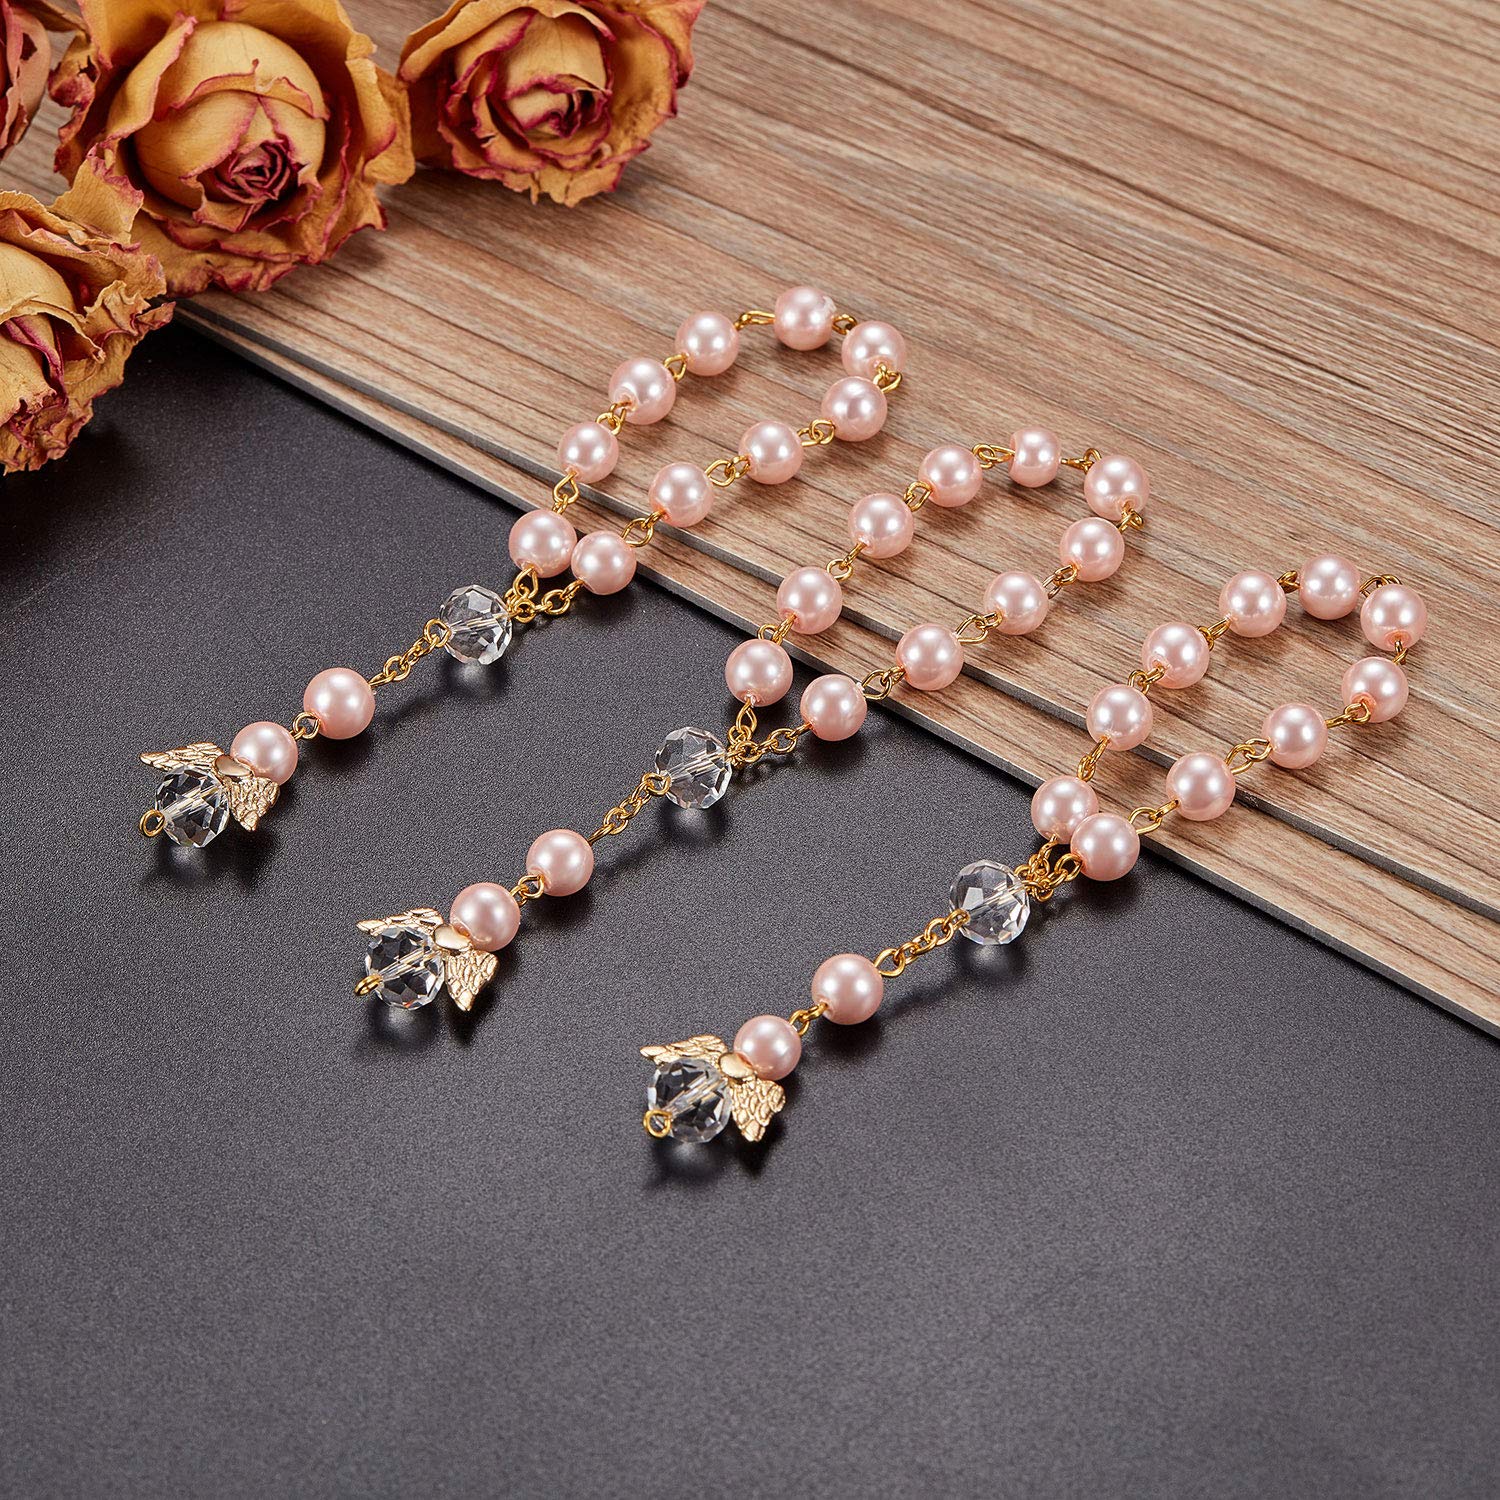 30 Pieces Baptism Rosary Acrylic Rosary Beads Mini Rosaries with Angel for The First Communion Baptism Party Favors (Pink Gold)